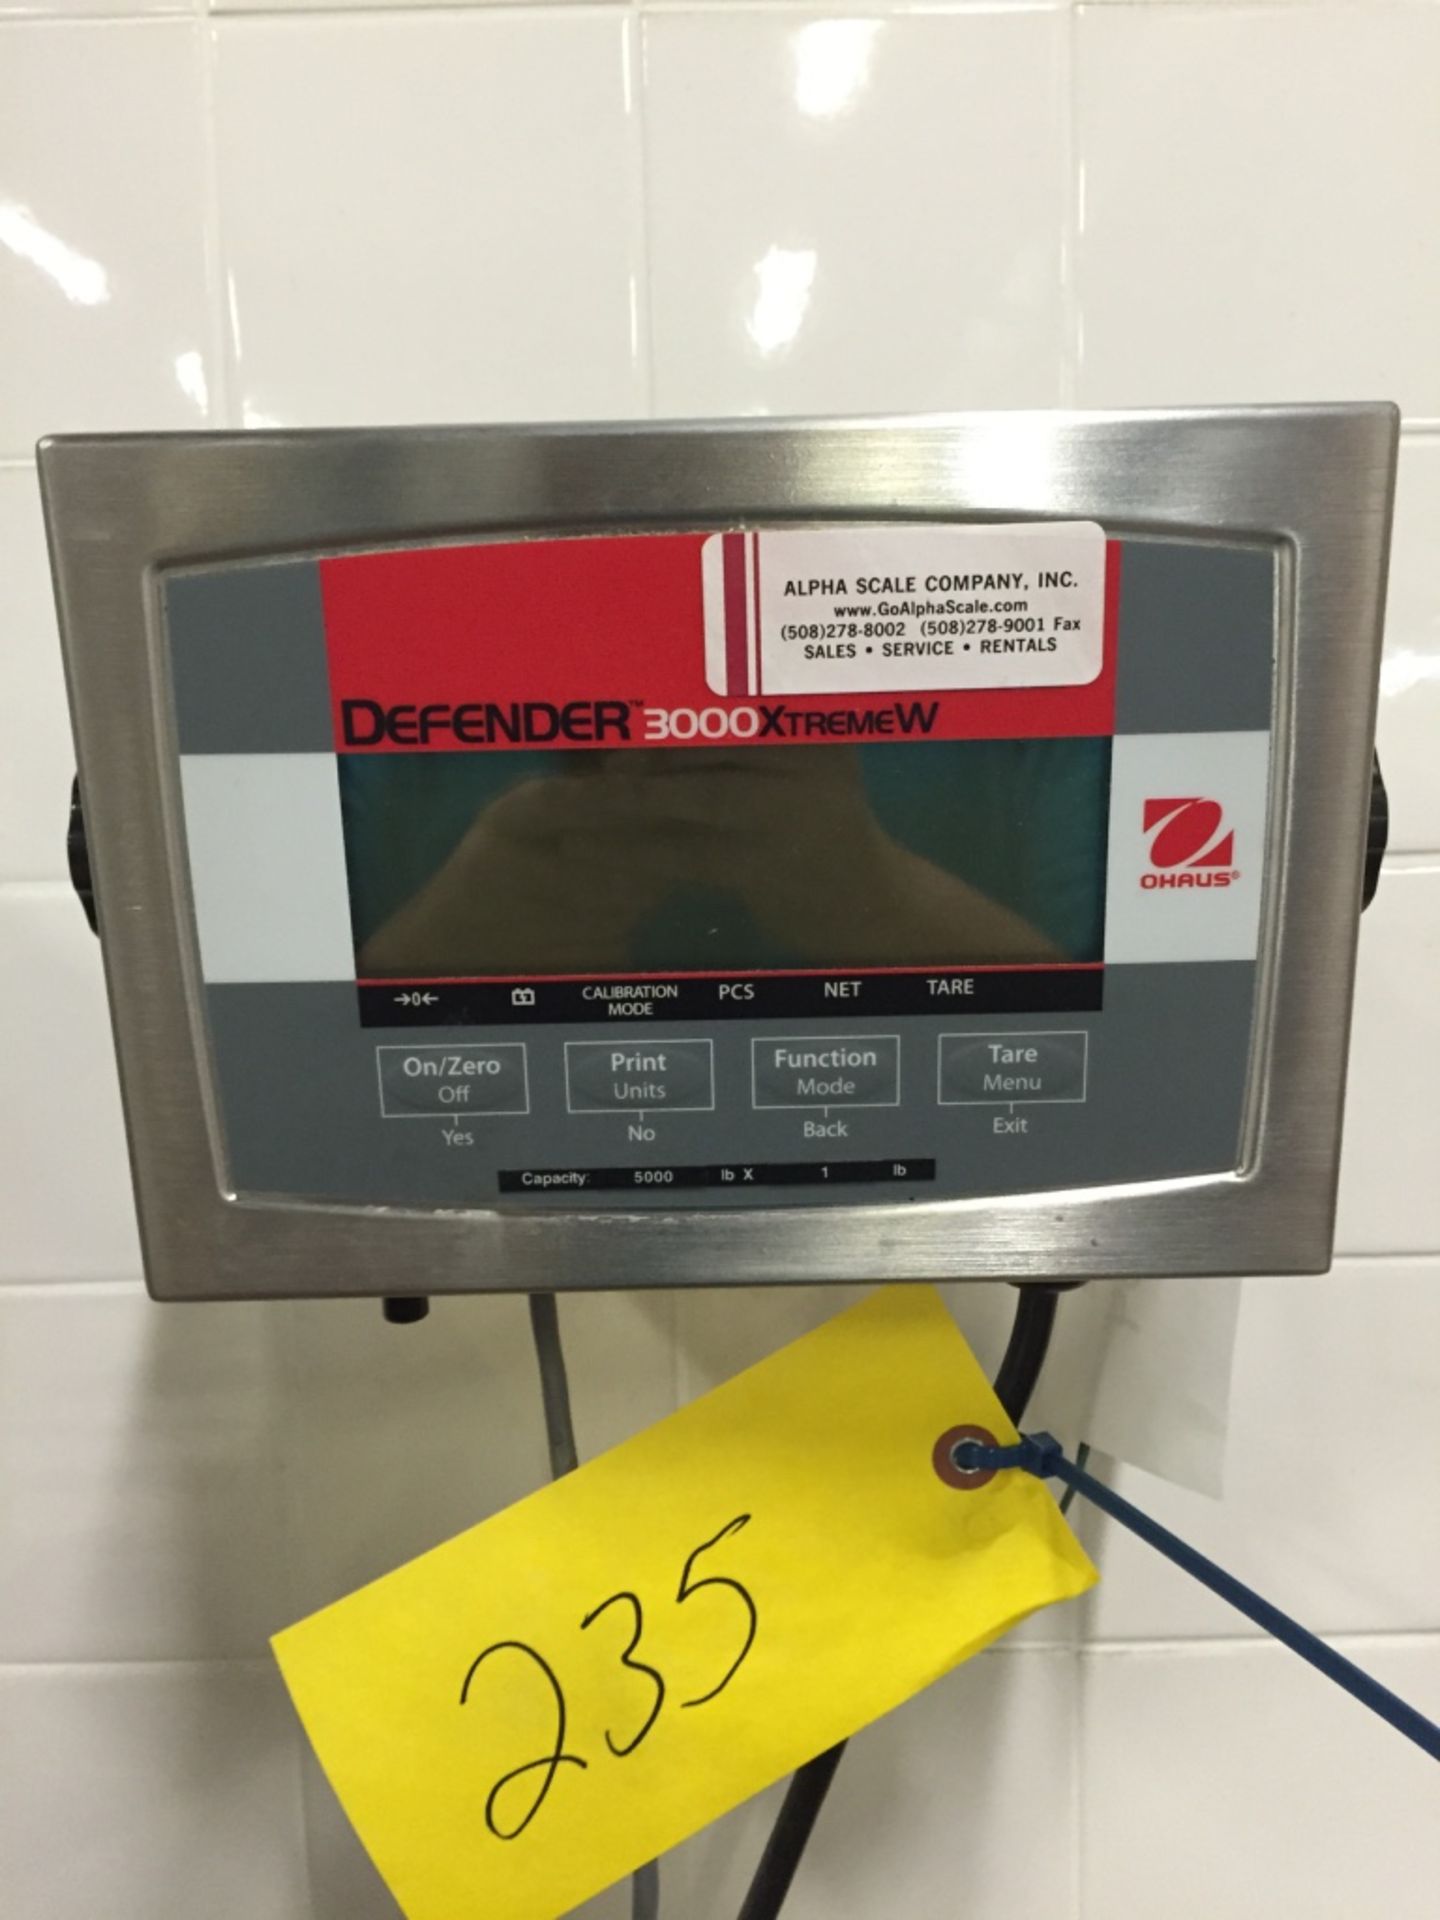 Defender 3000 XtremeW Floor Scale - Rigging Fee $100, If Crating or Lumber is Needed Add Additional - Image 2 of 2